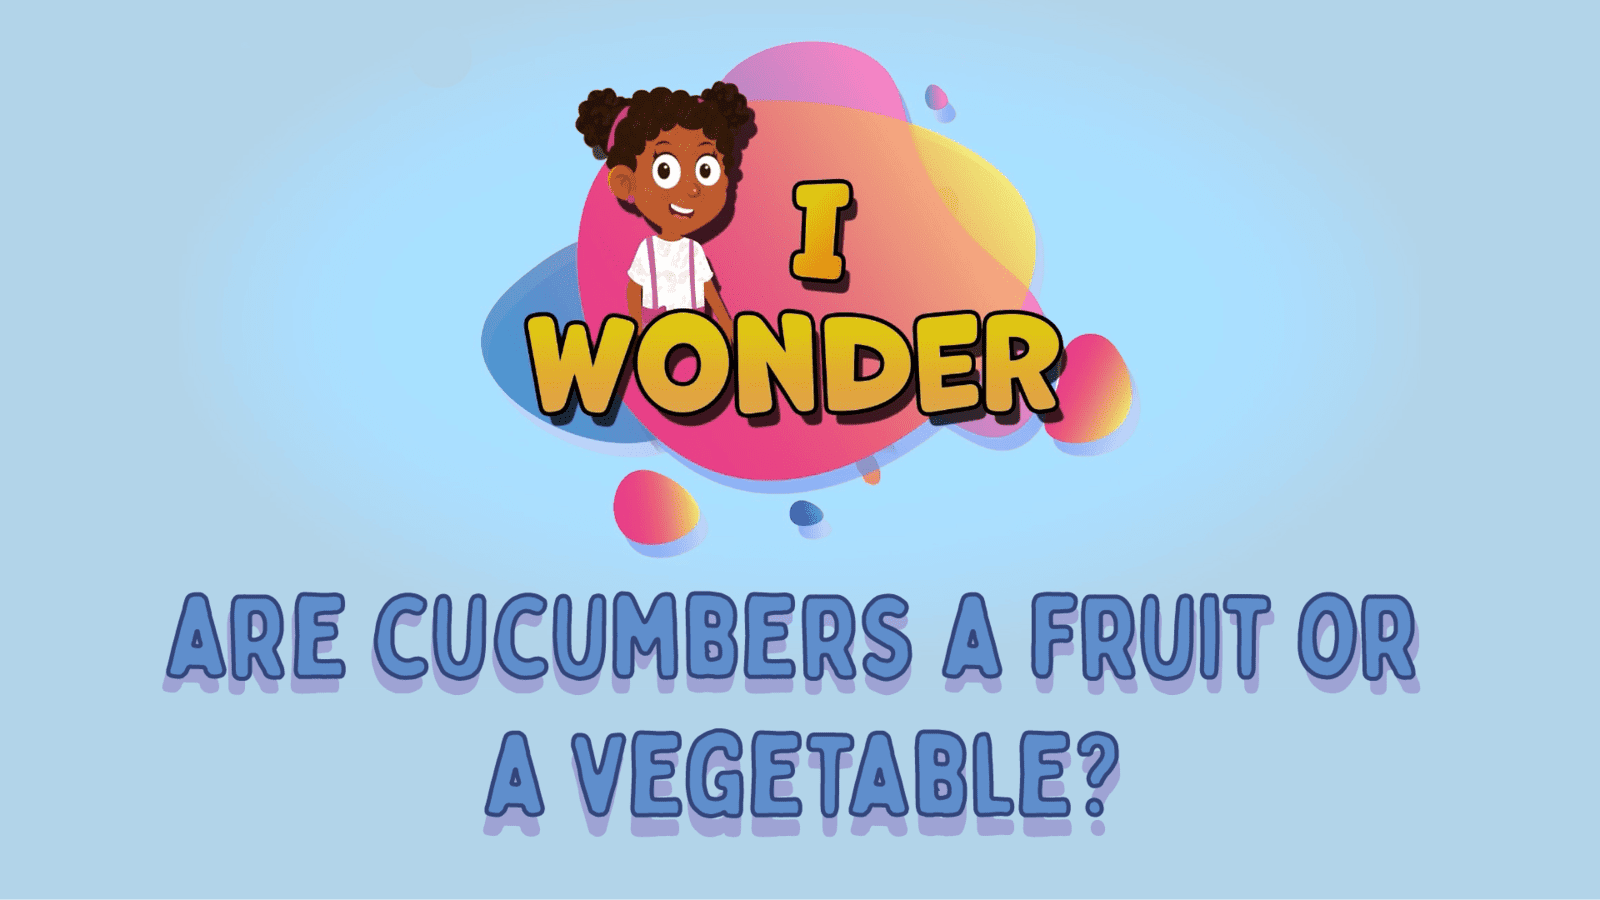 Are Cucumbers Fruits Or Vegetables?